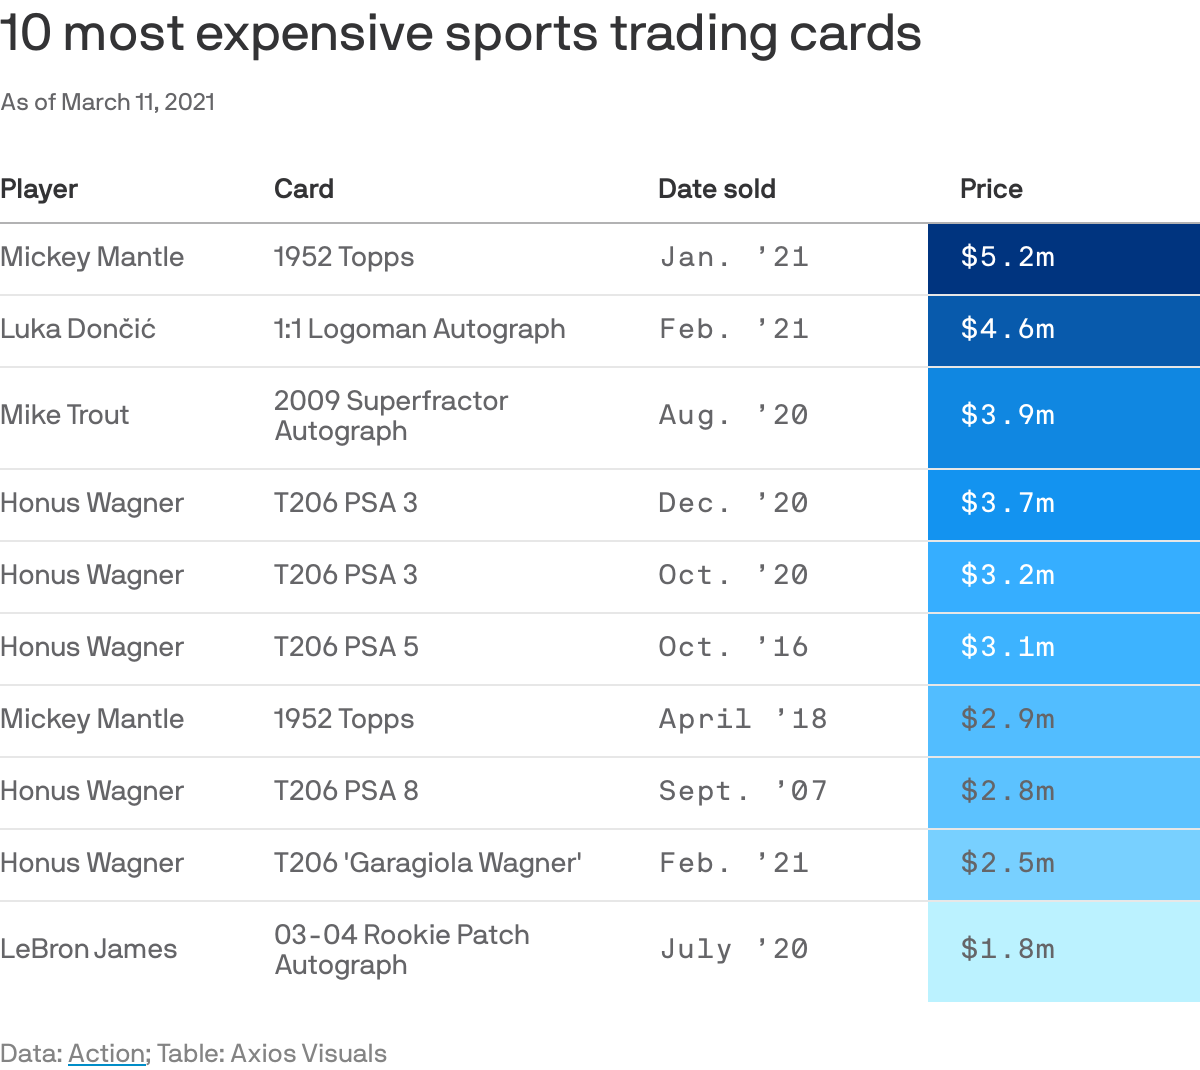 10 most expensive sports trading cards